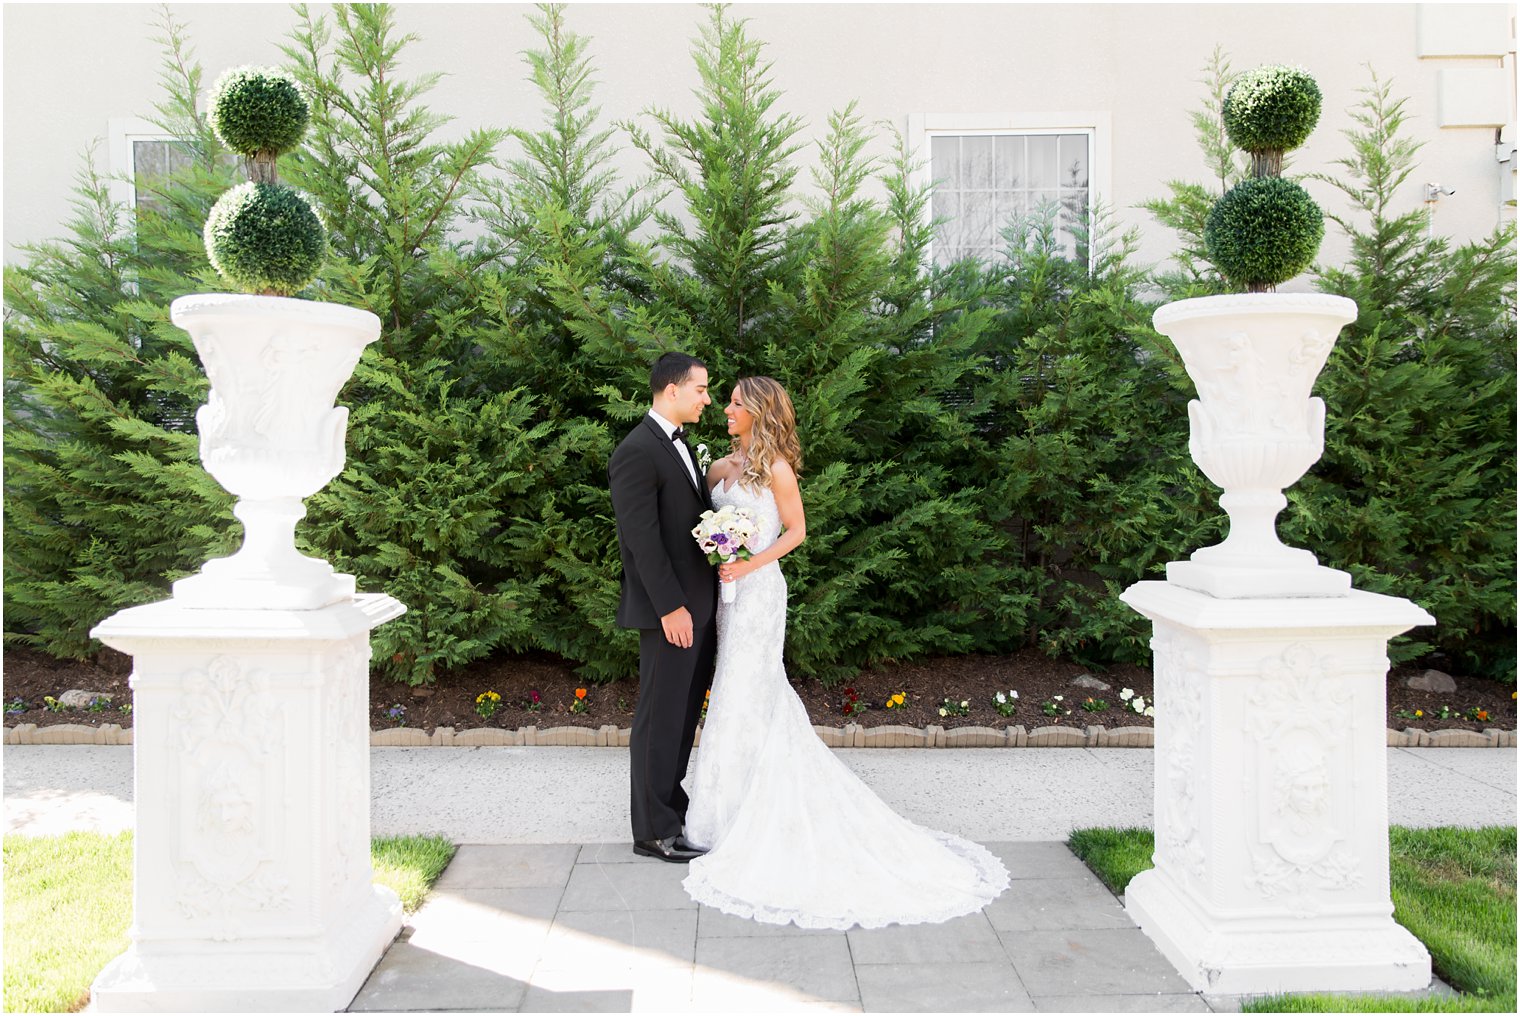 North Jersey Wedding at the Wilshire Grand Hotel | Photos by Idalia Photography